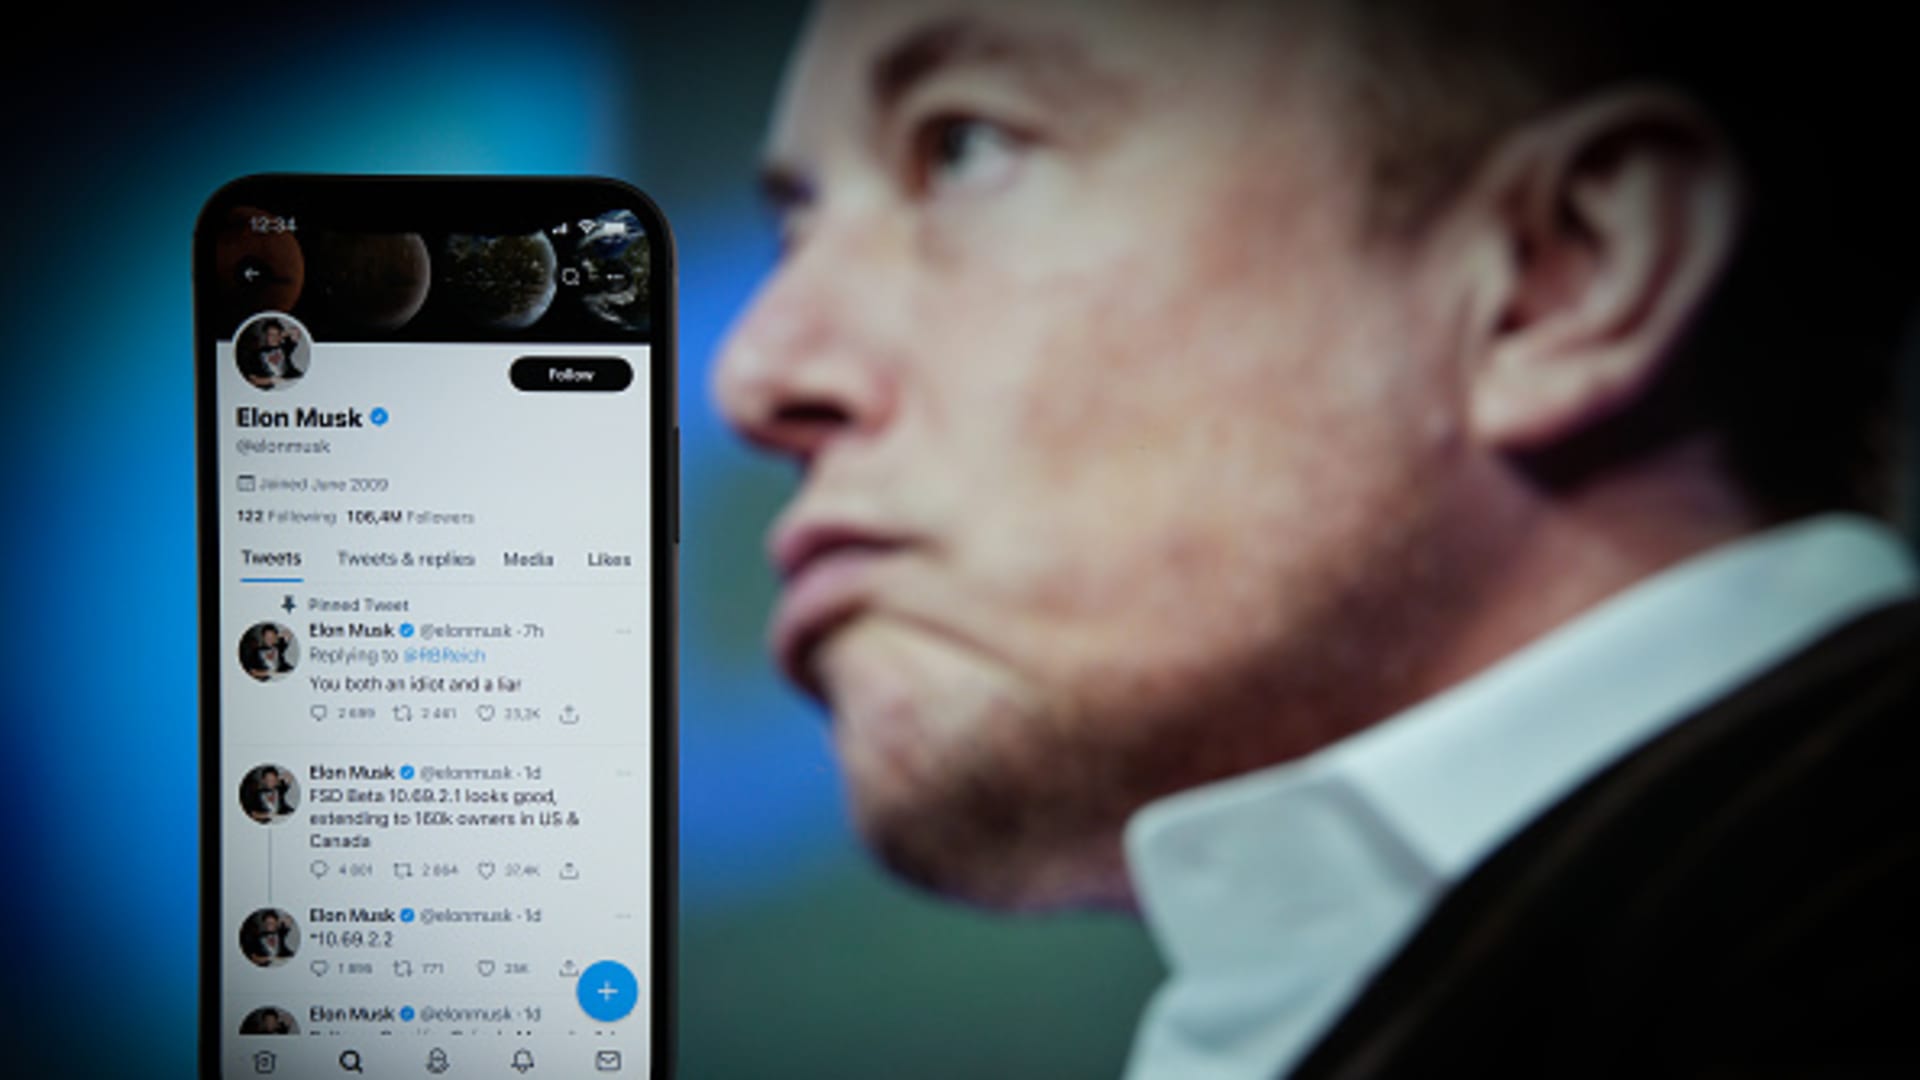 Elon Musk has pulled greater than 50 Tesla workers into his Twitter takeover